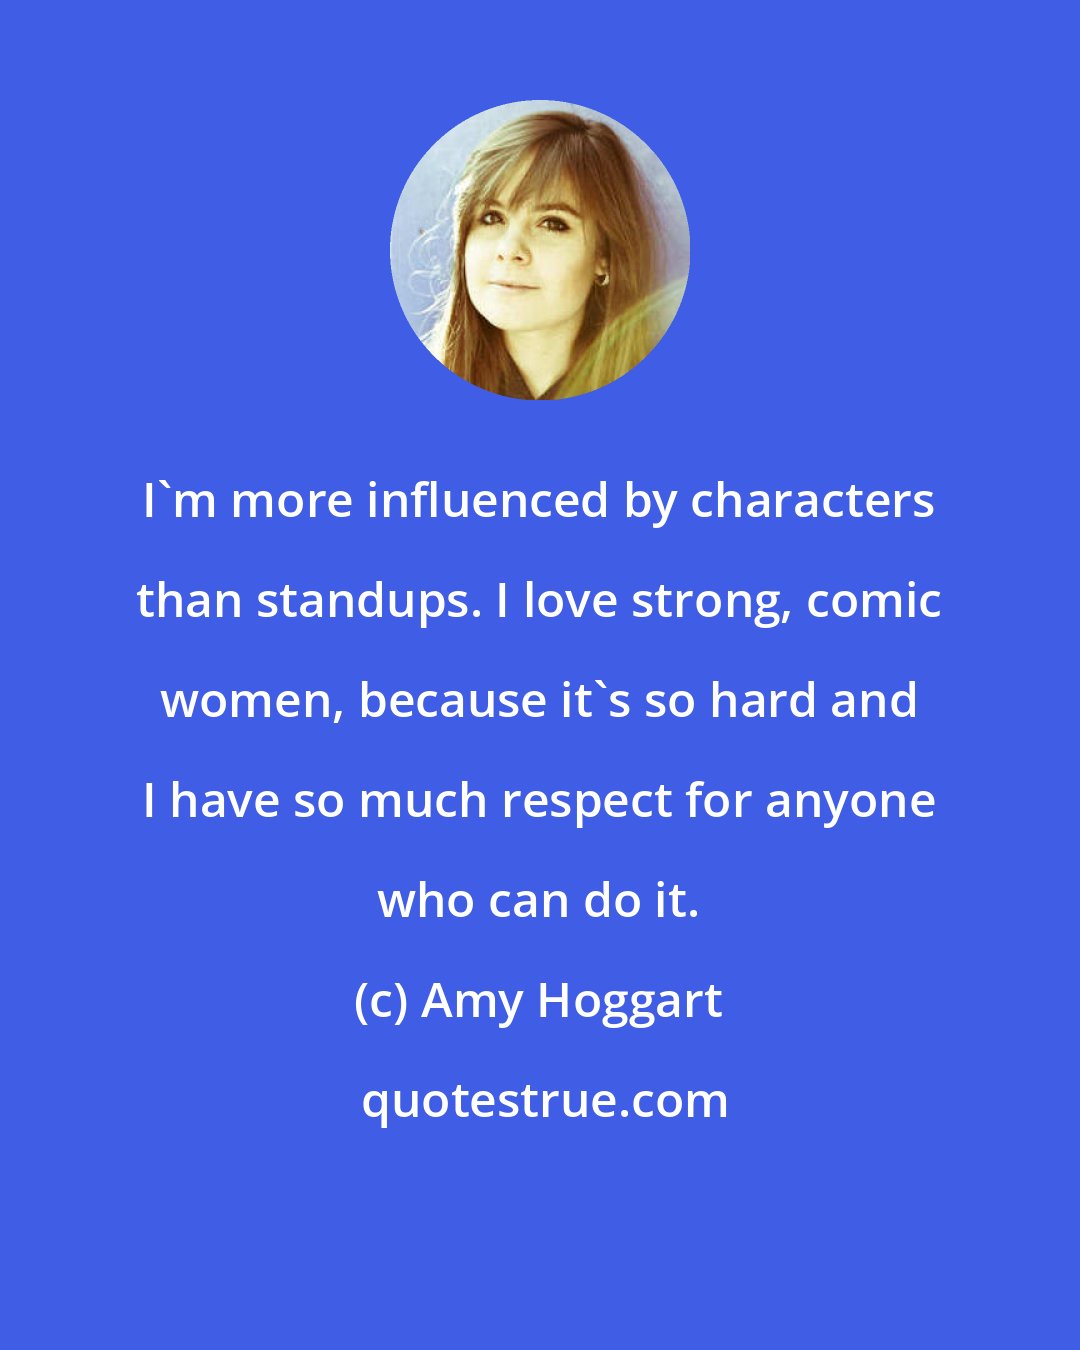 Amy Hoggart: I'm more influenced by characters than standups. I love strong, comic women, because it's so hard and I have so much respect for anyone who can do it.